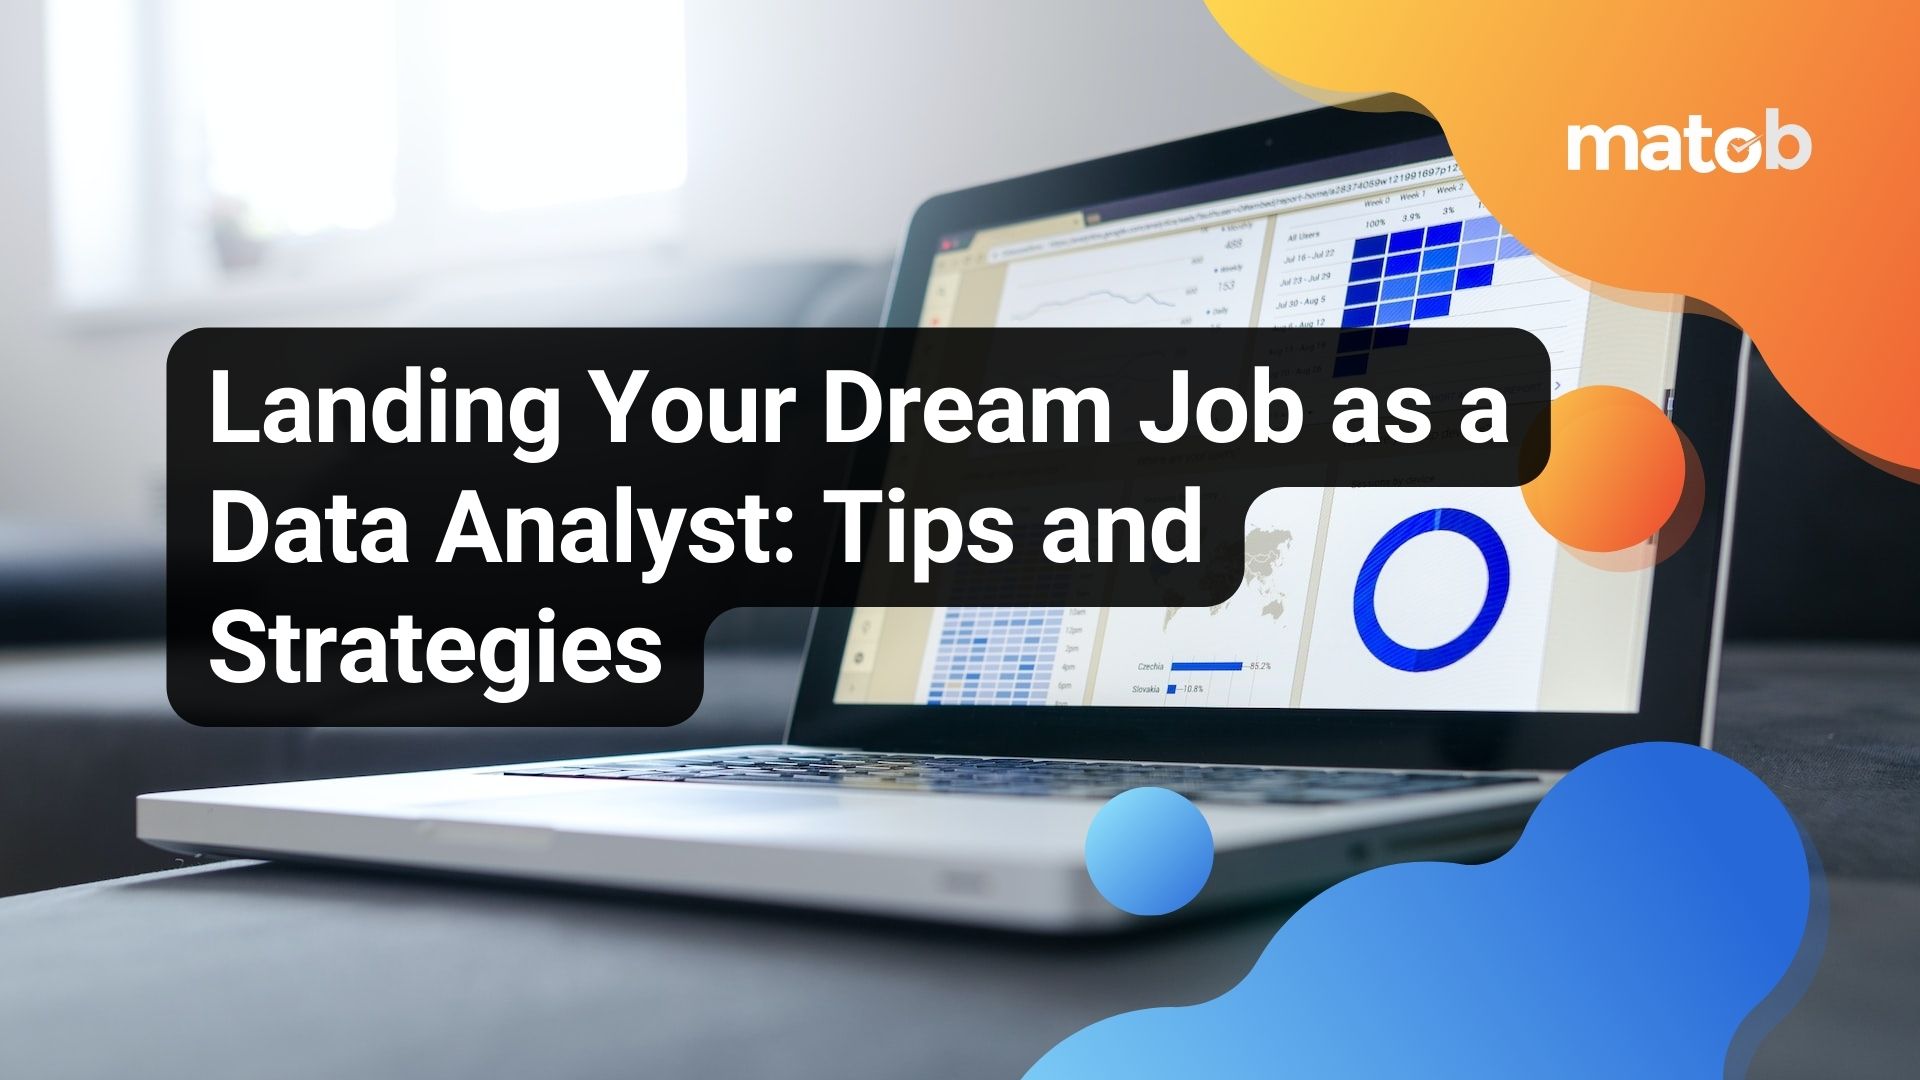 Landing Your Dream Job as a Data Analyst: Tips and Strategies